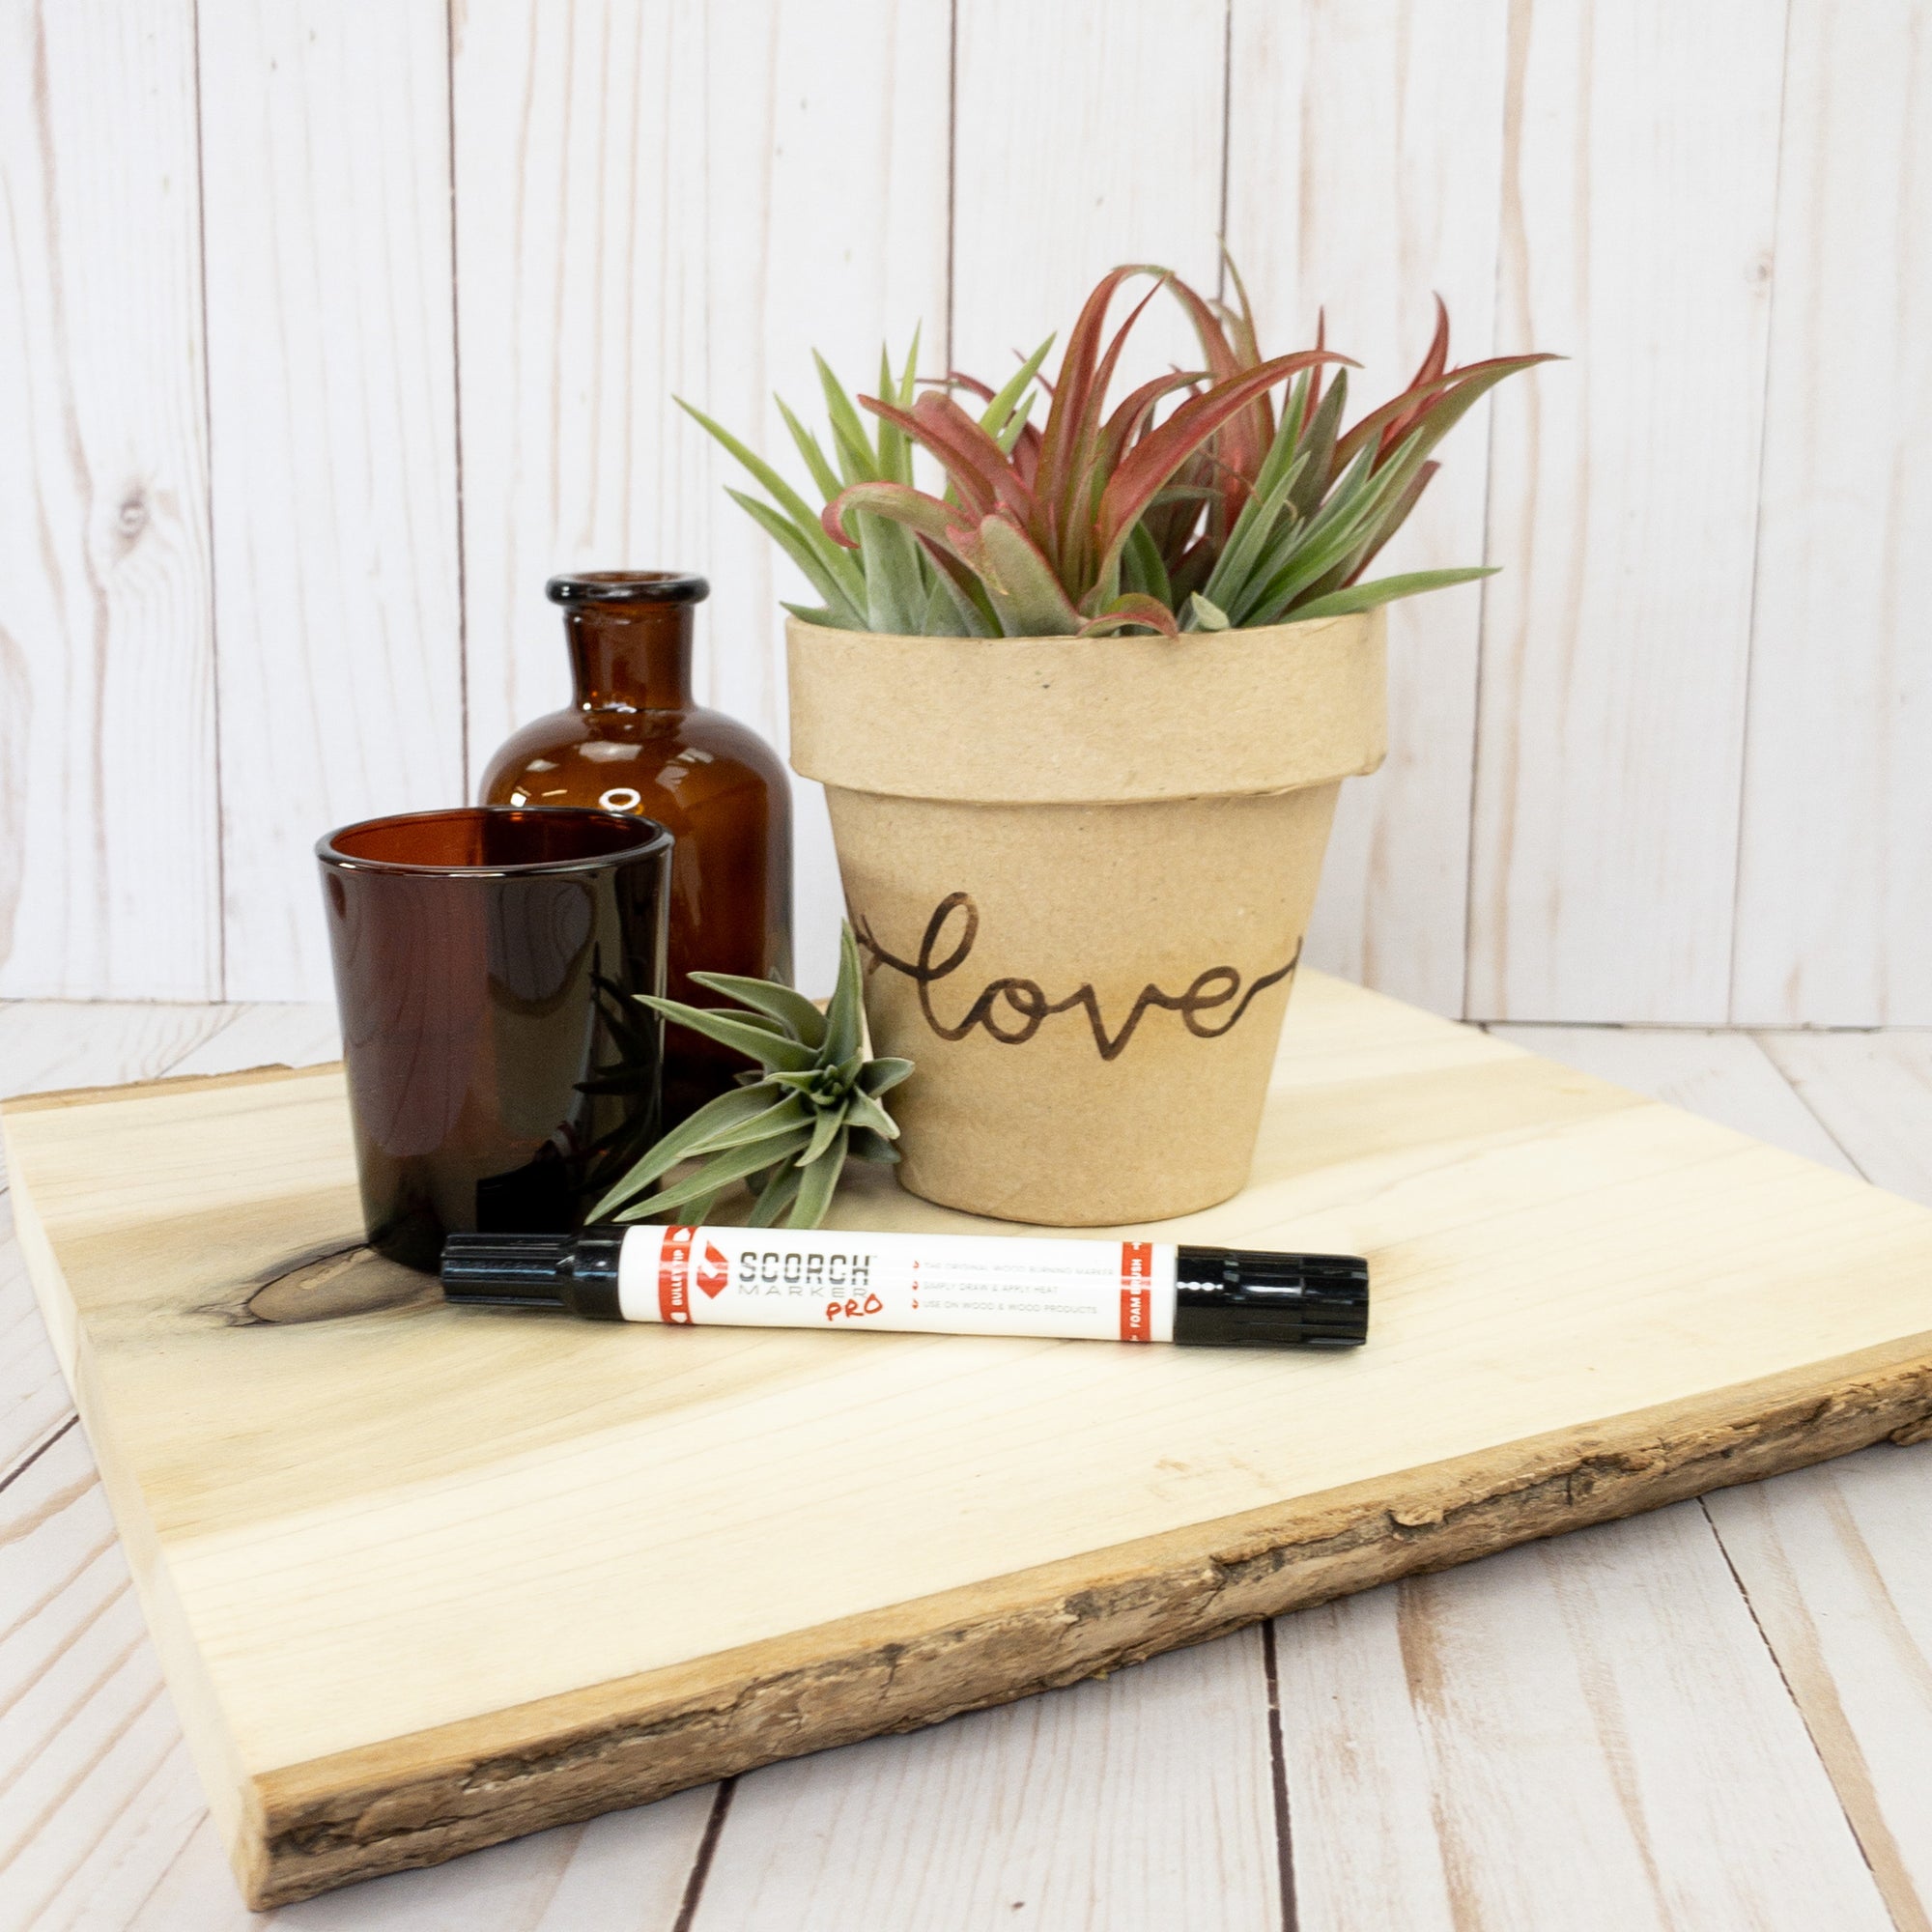 5 Wood Burning Projects that are Perfect for Valentine's Day